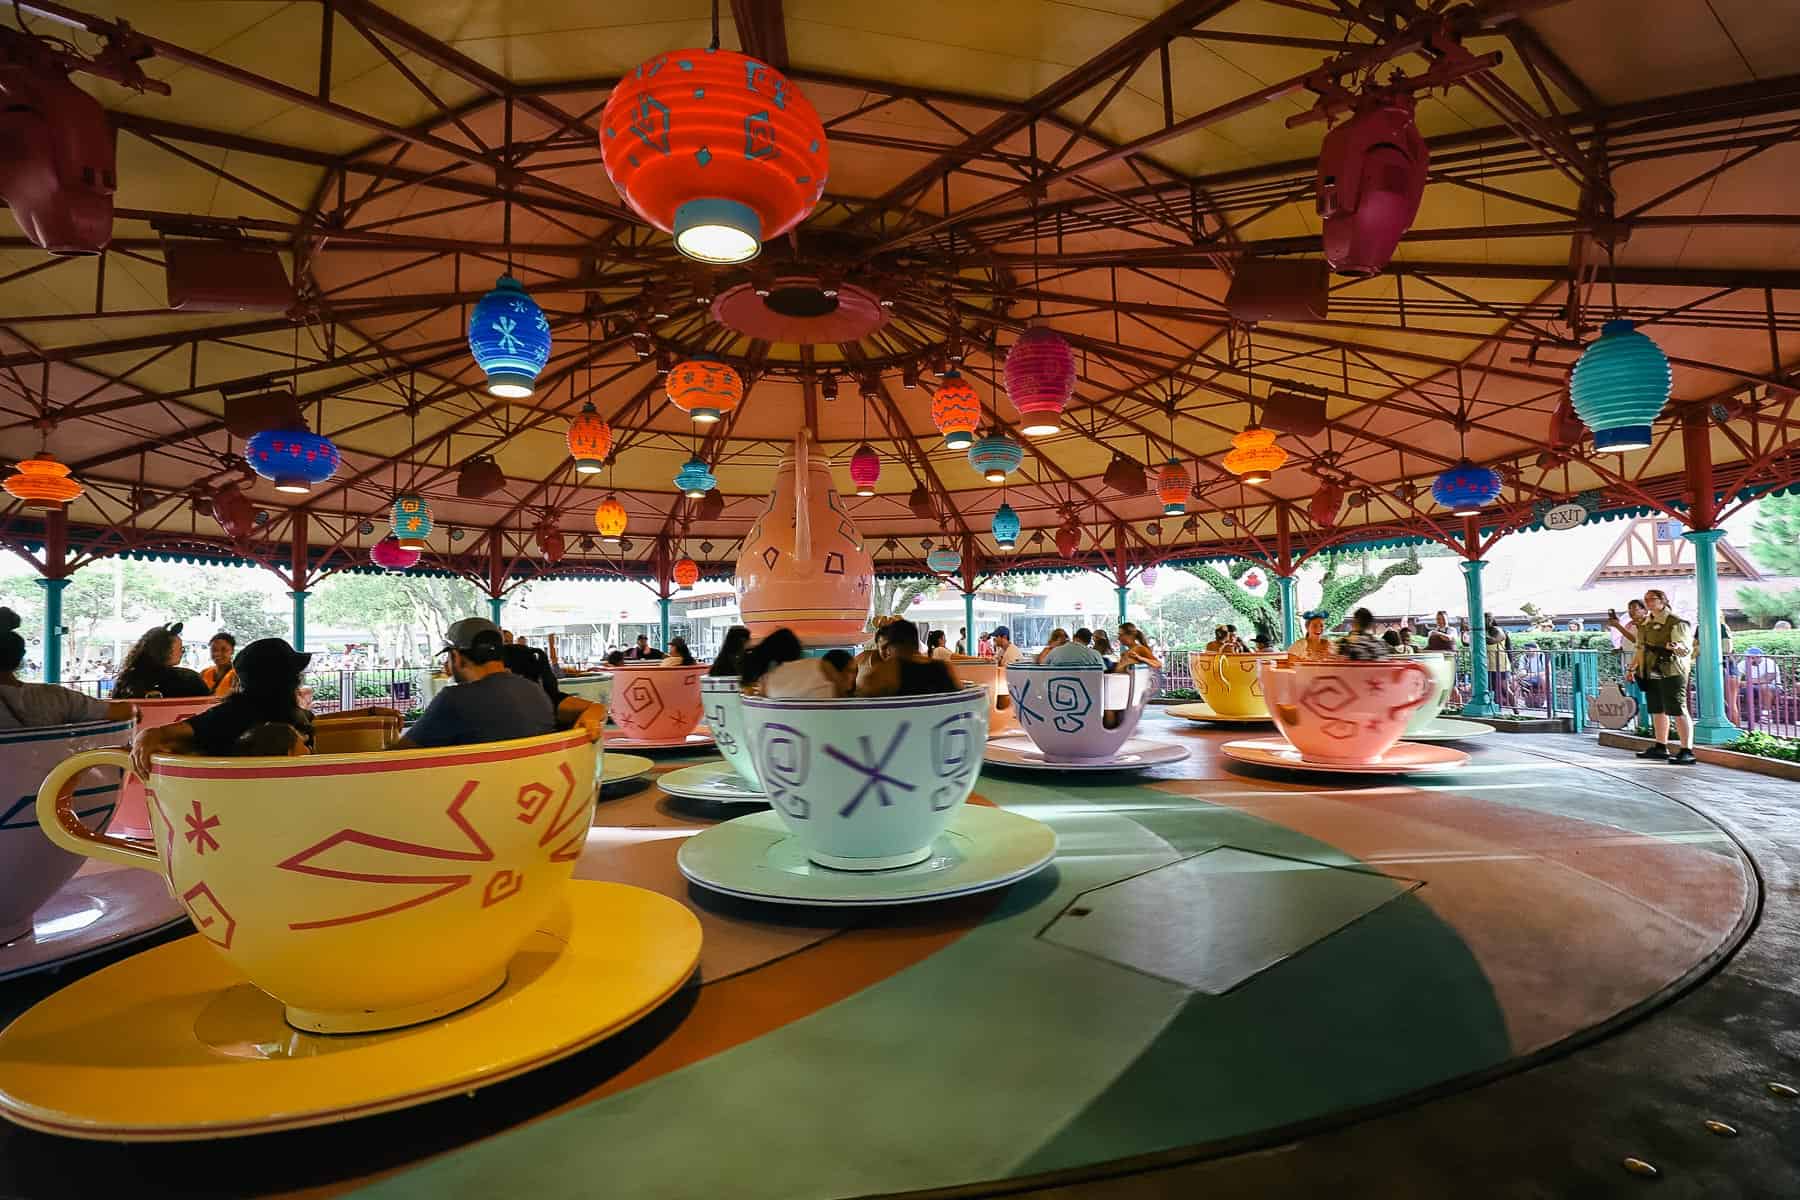 A look at the teacups in motion from outside the attraction. 